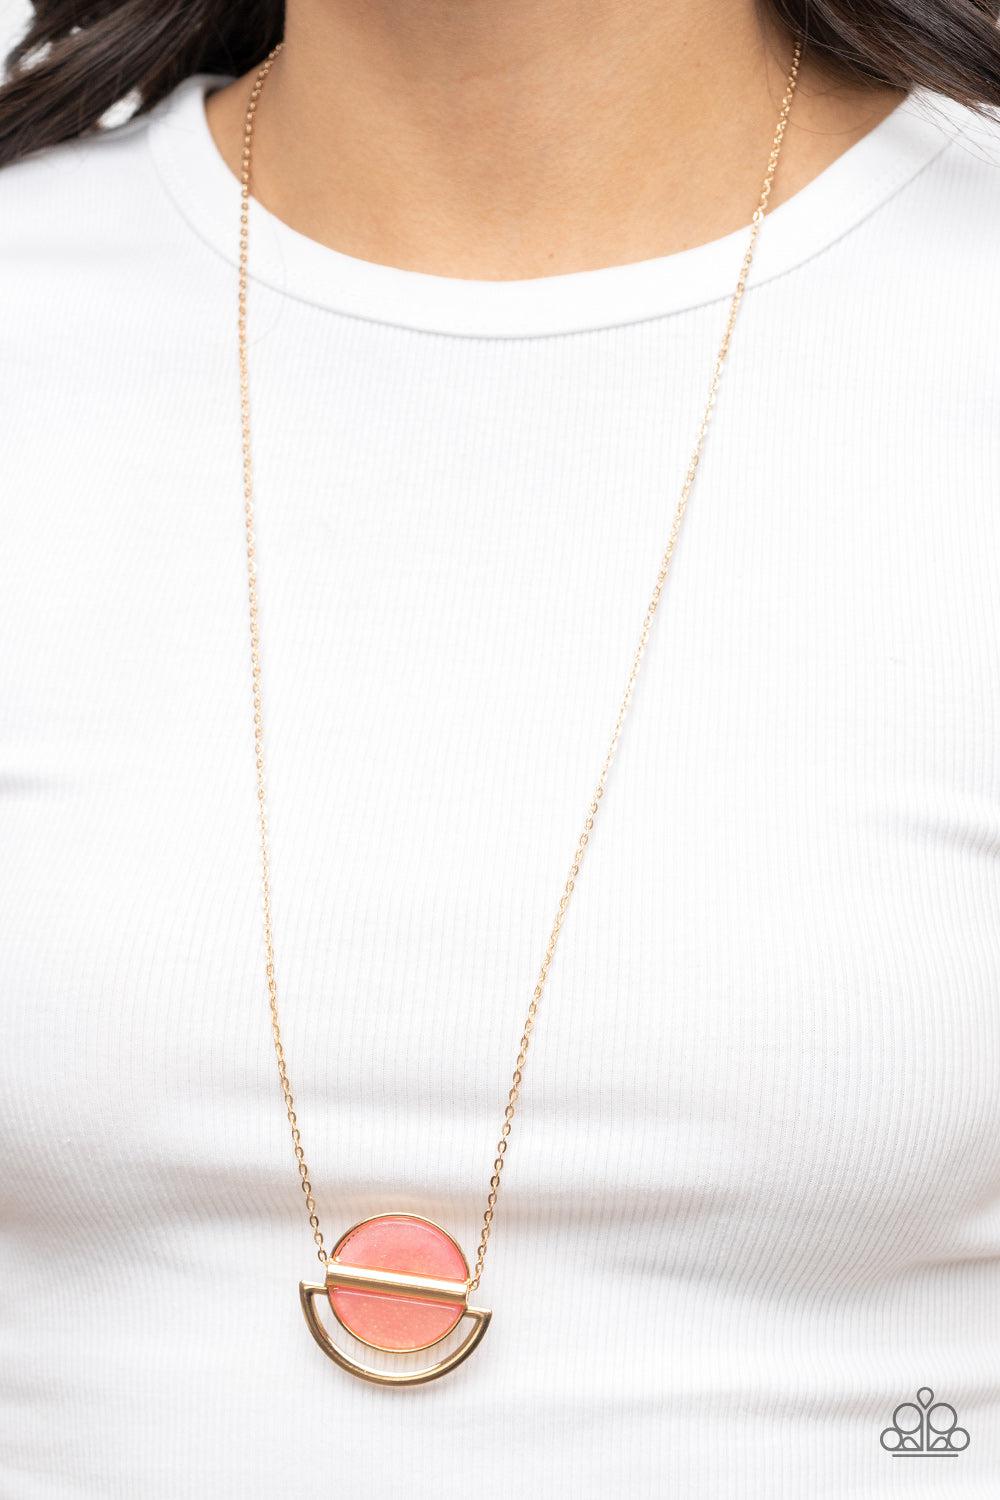 Ethereal Eclipse Pink Stone & Gold Necklace - Paparazzi Accessories- lightbox - CarasShop.com - $5 Jewelry by Cara Jewels